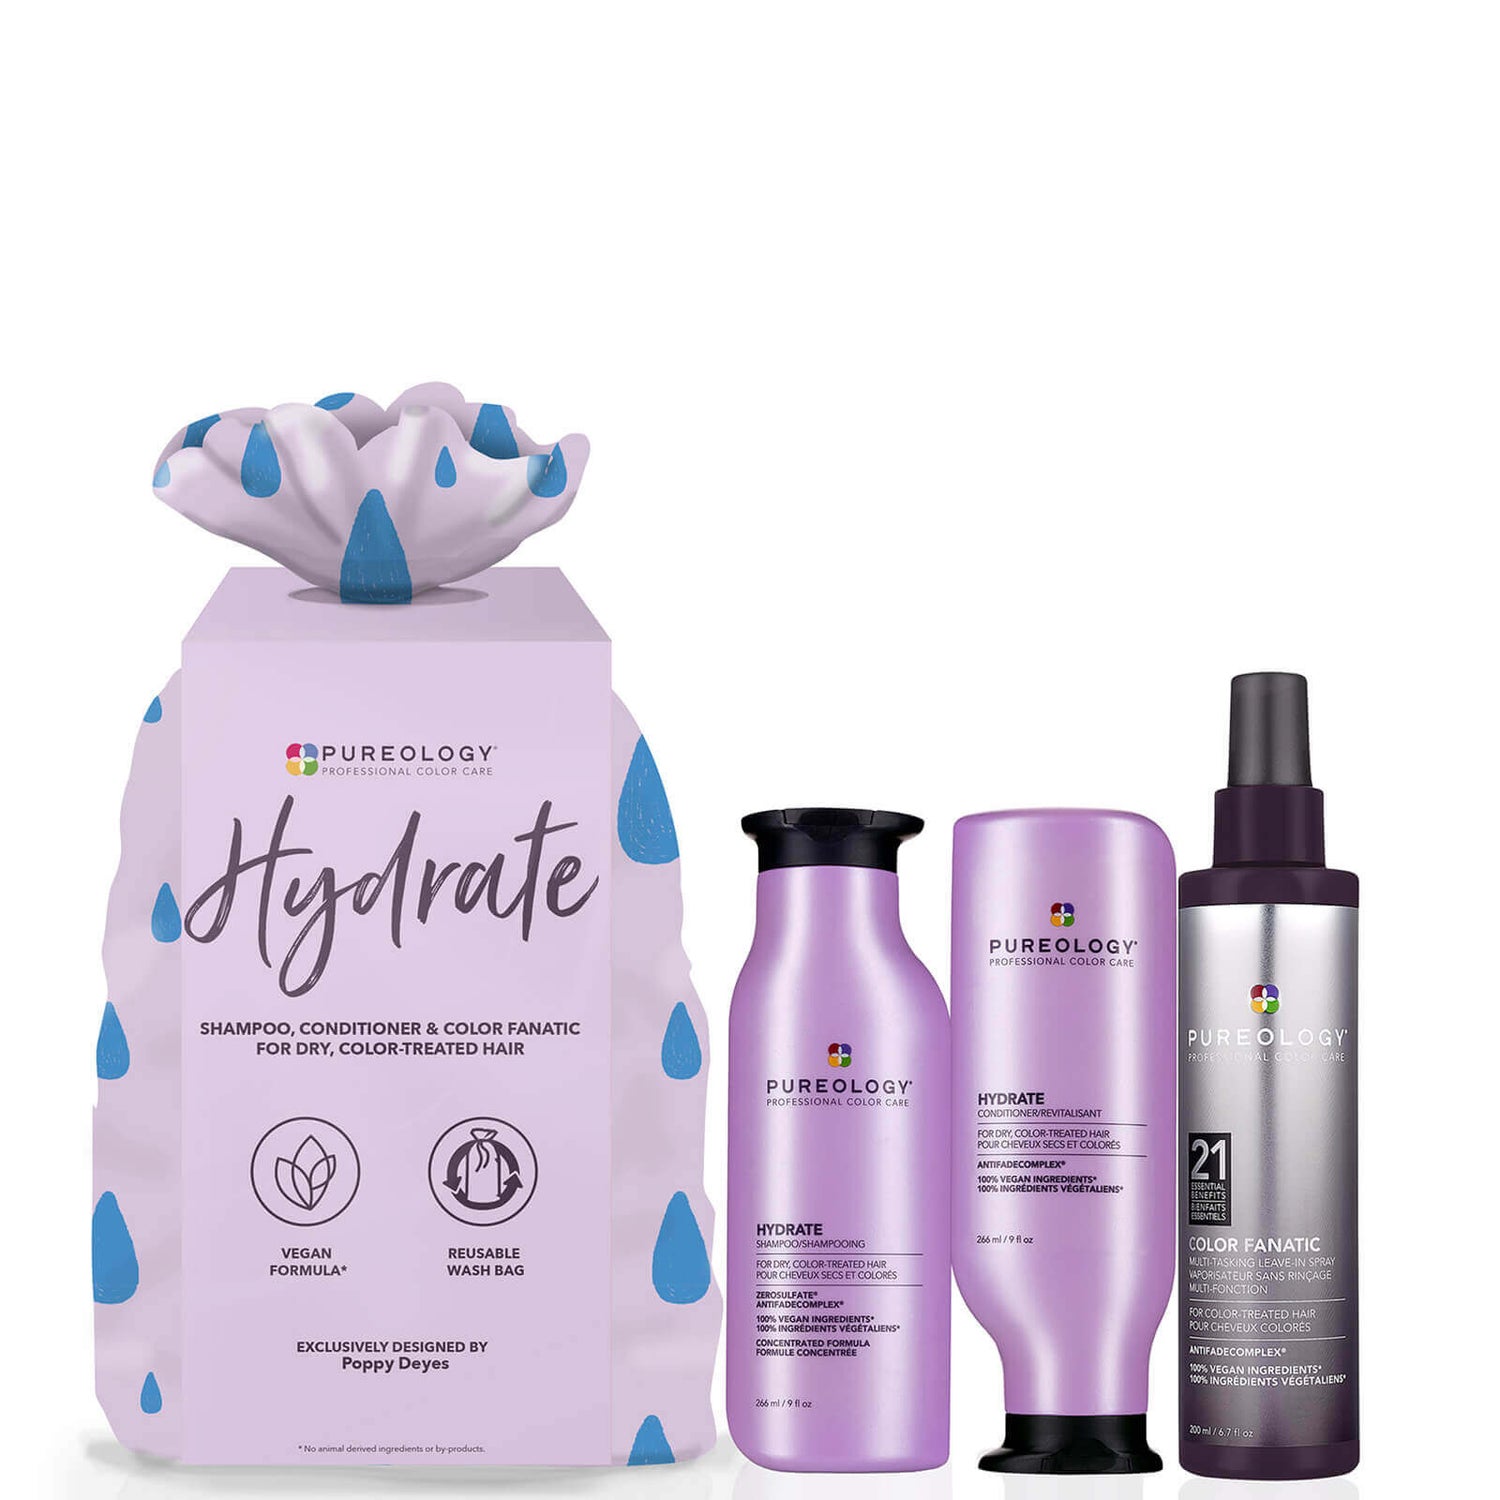 Pureology Hydrate and Colour Fanatic Set (Worth £72.35)